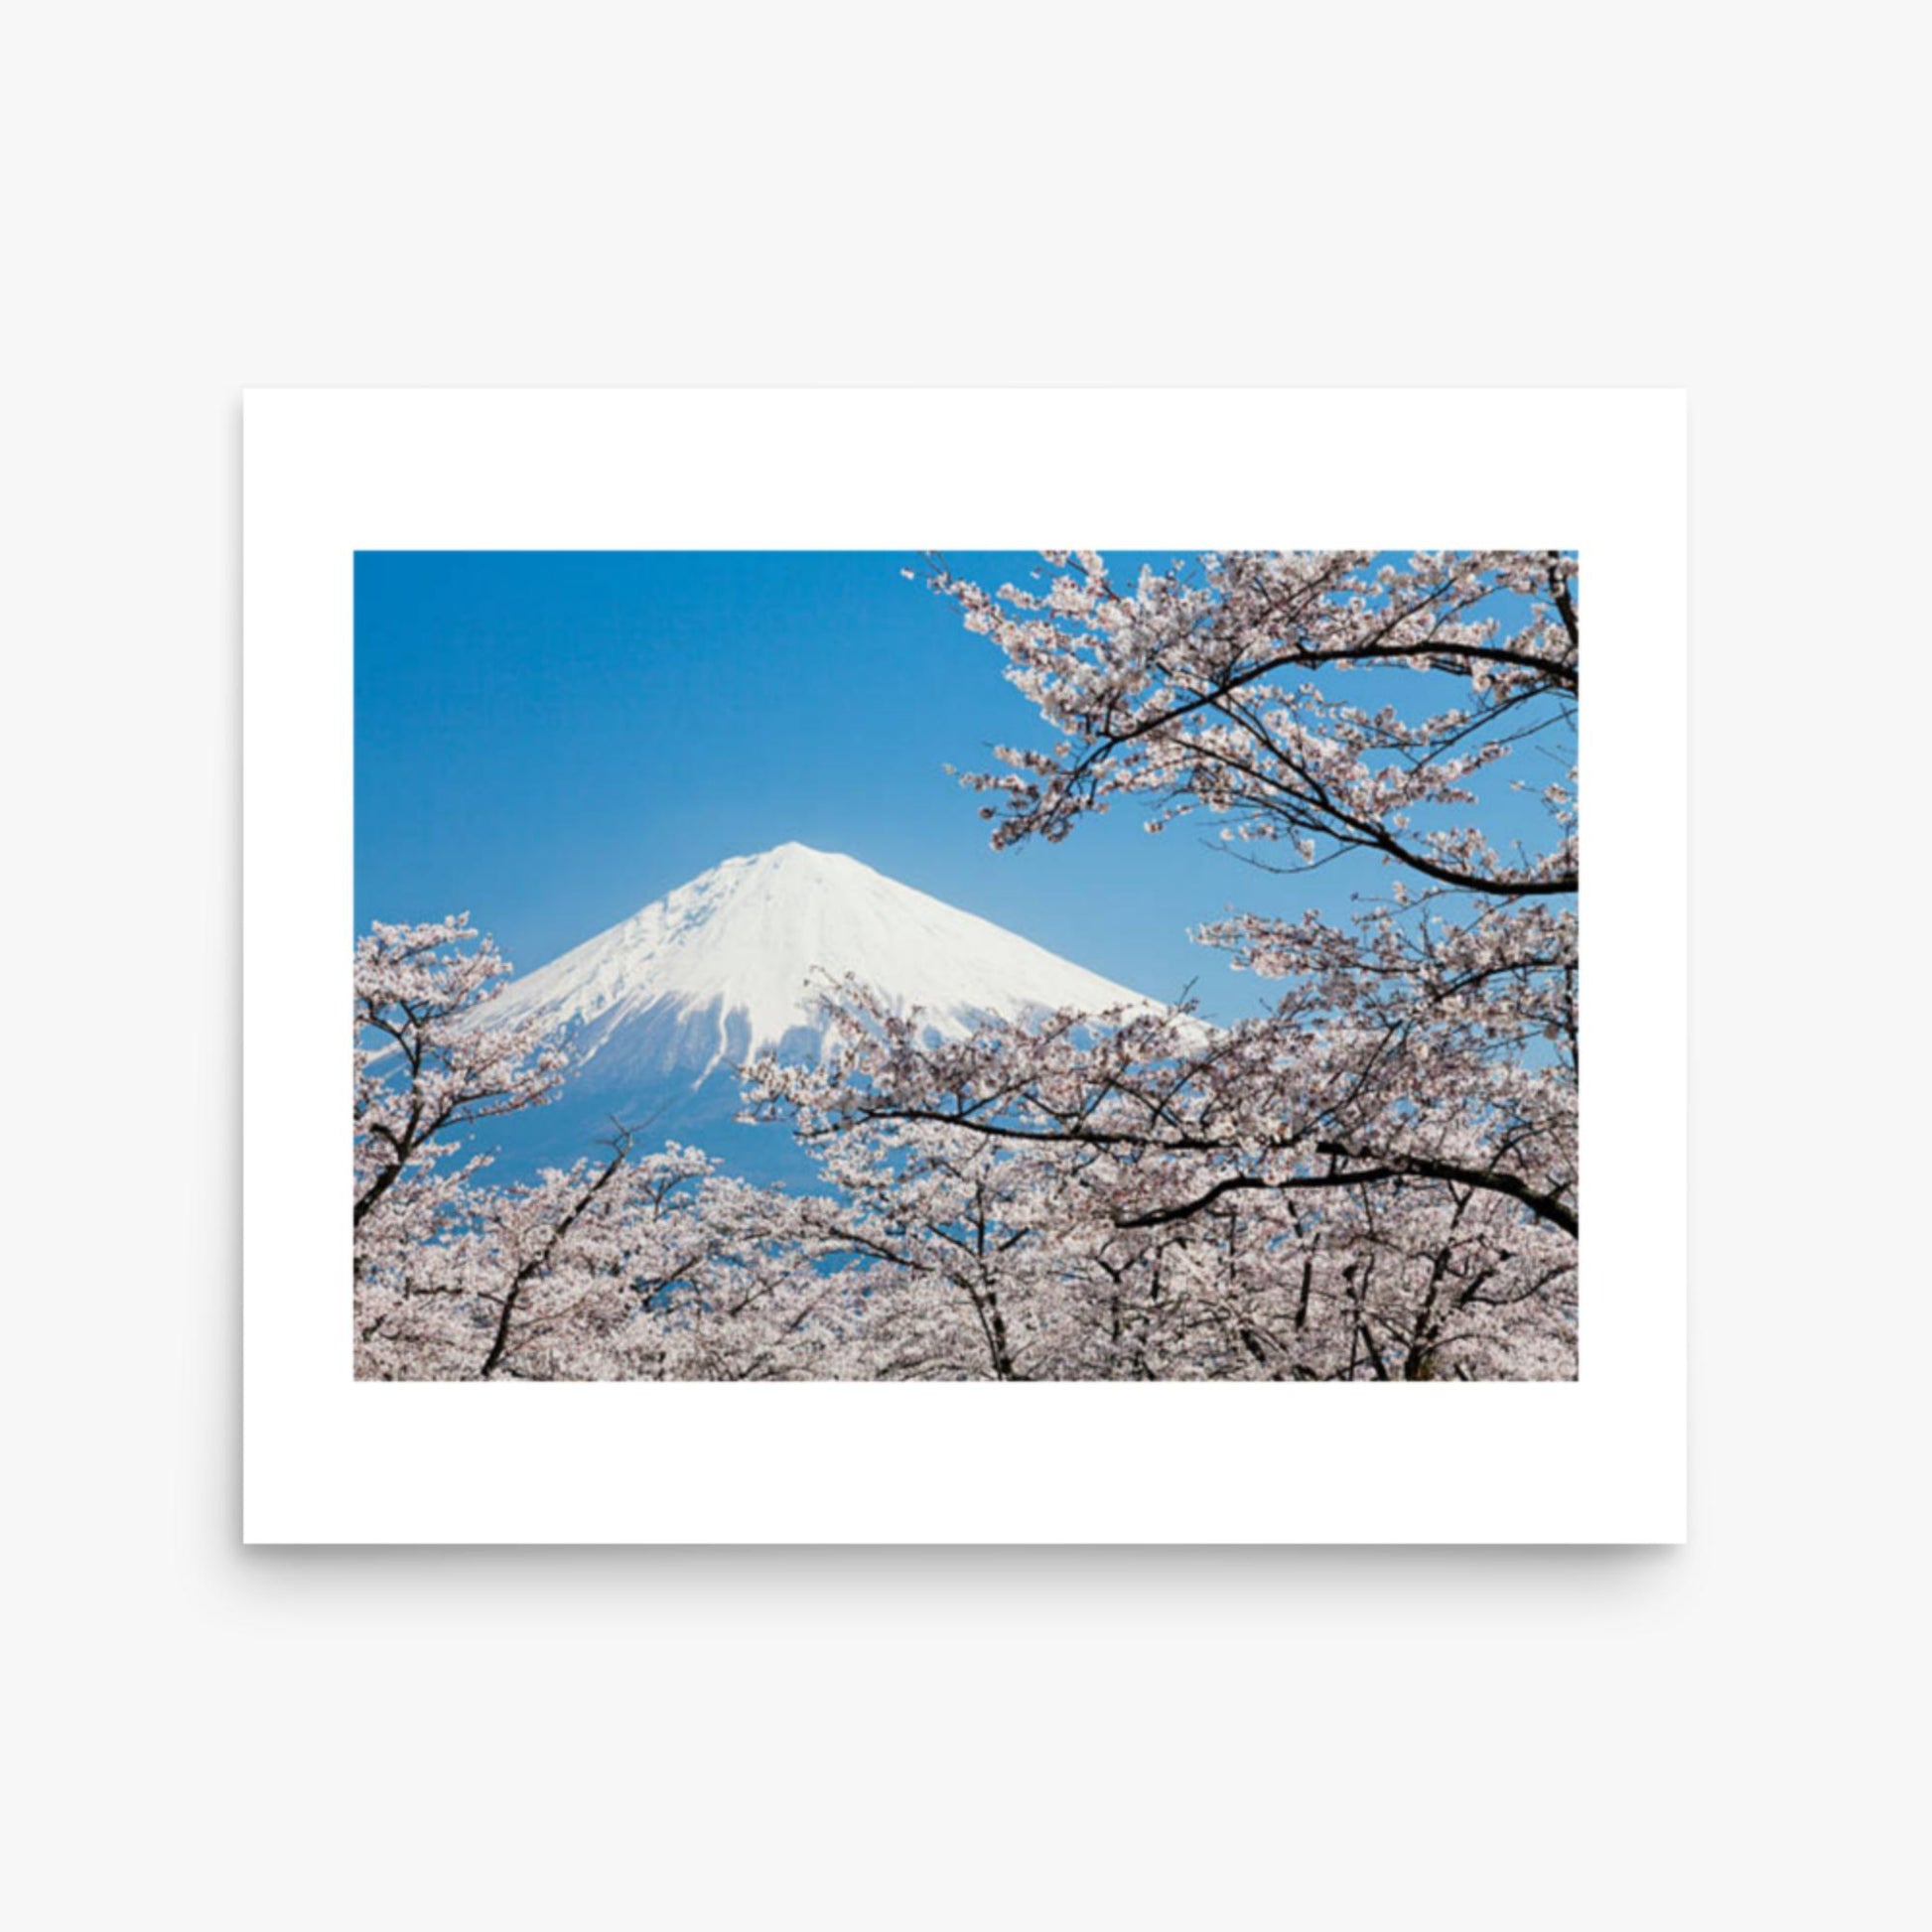 Mount Fuji & Cherry Blossoms 16x20 in Poster